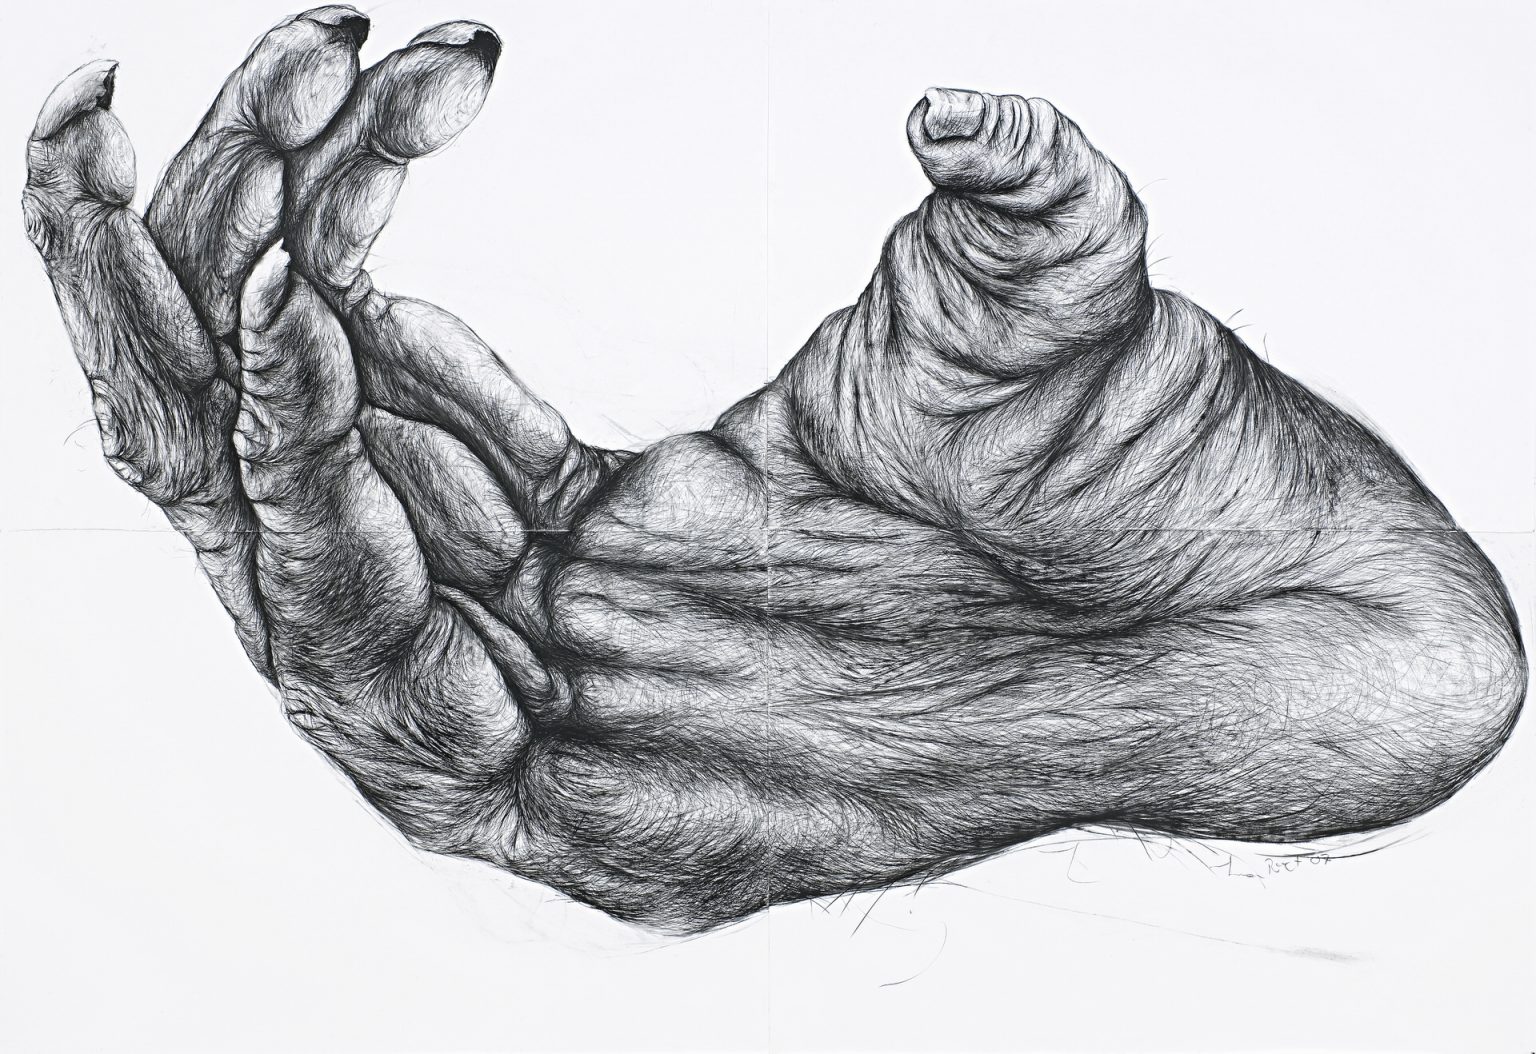 large drawing of a primate foot using charcoal & conte on silk paper